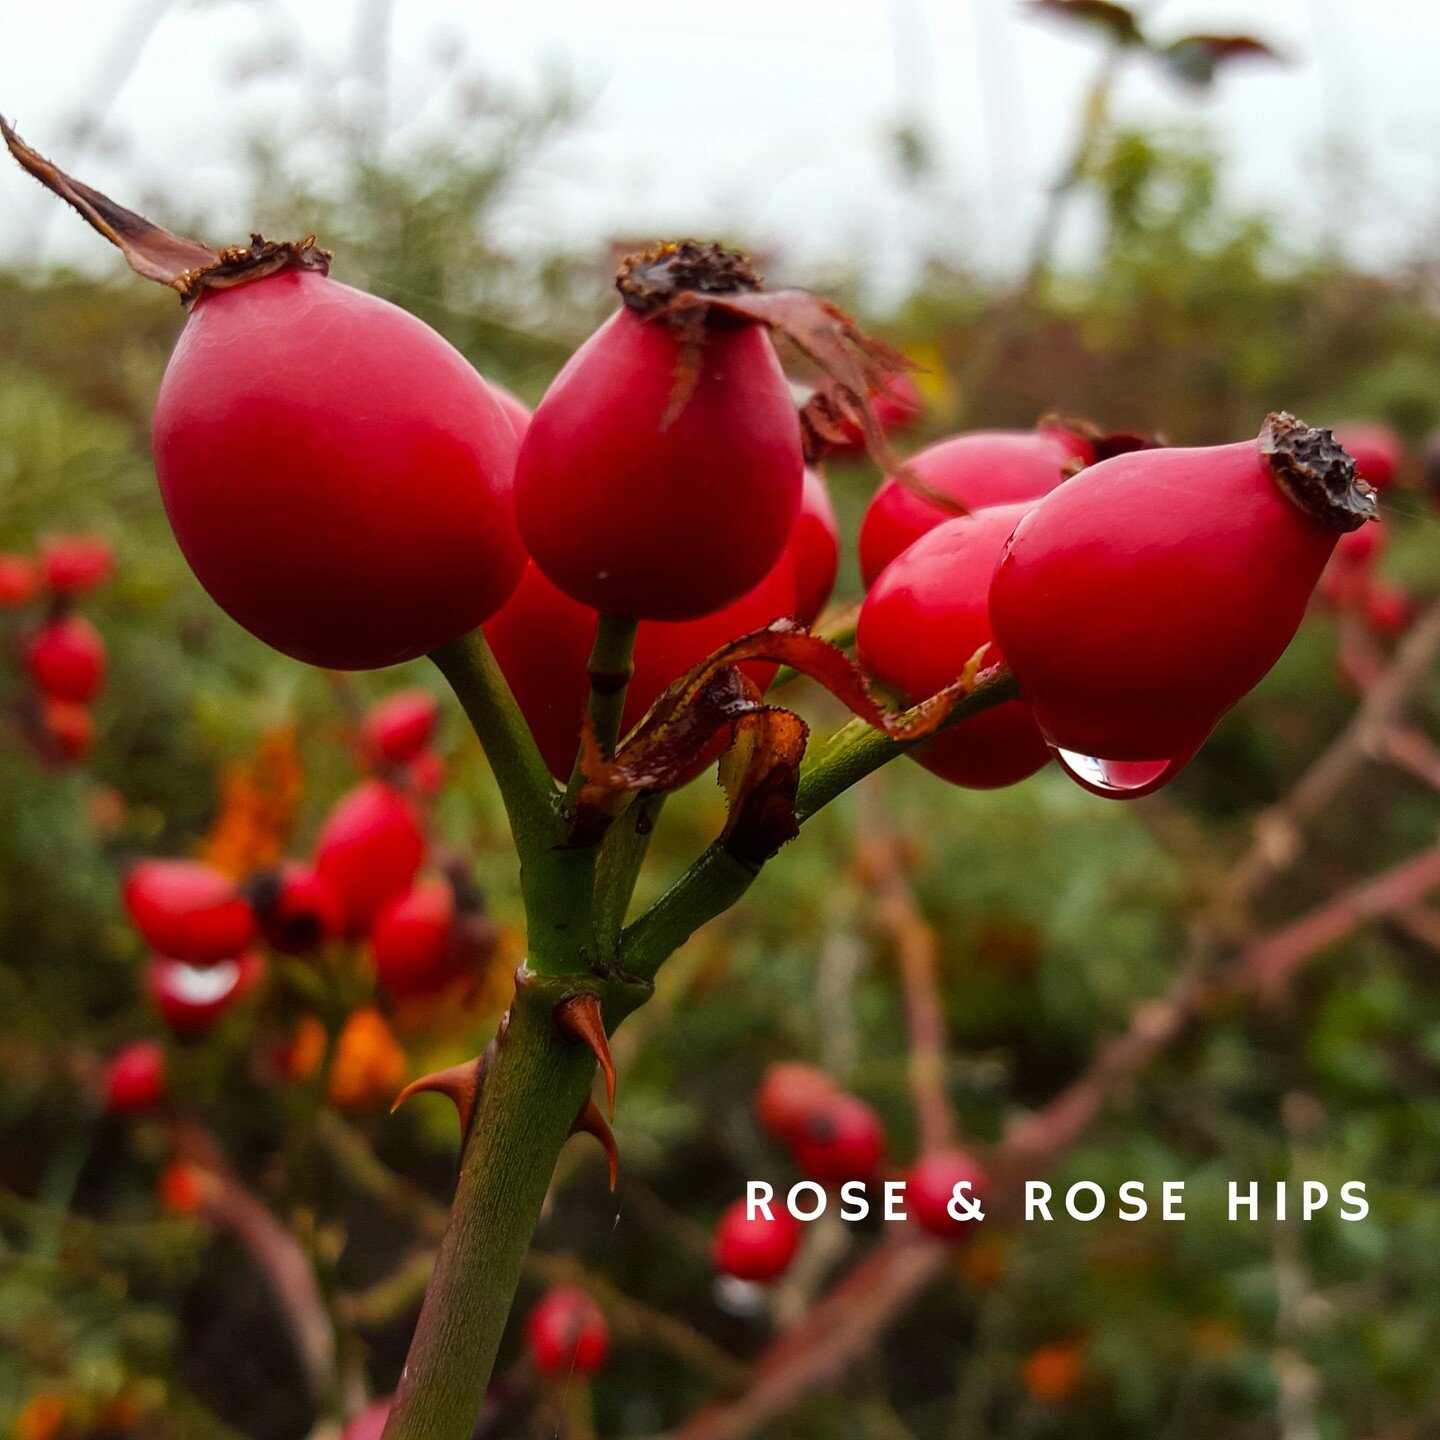 Rose maintains skin's pH balance while controlling excess oil. Antibacterial, anti-inflammatory, and astringent properties, and plenty of antioxidants work together to heal, repair, rejuvenate skin and speed wound healing.
Rose treats redness and irr